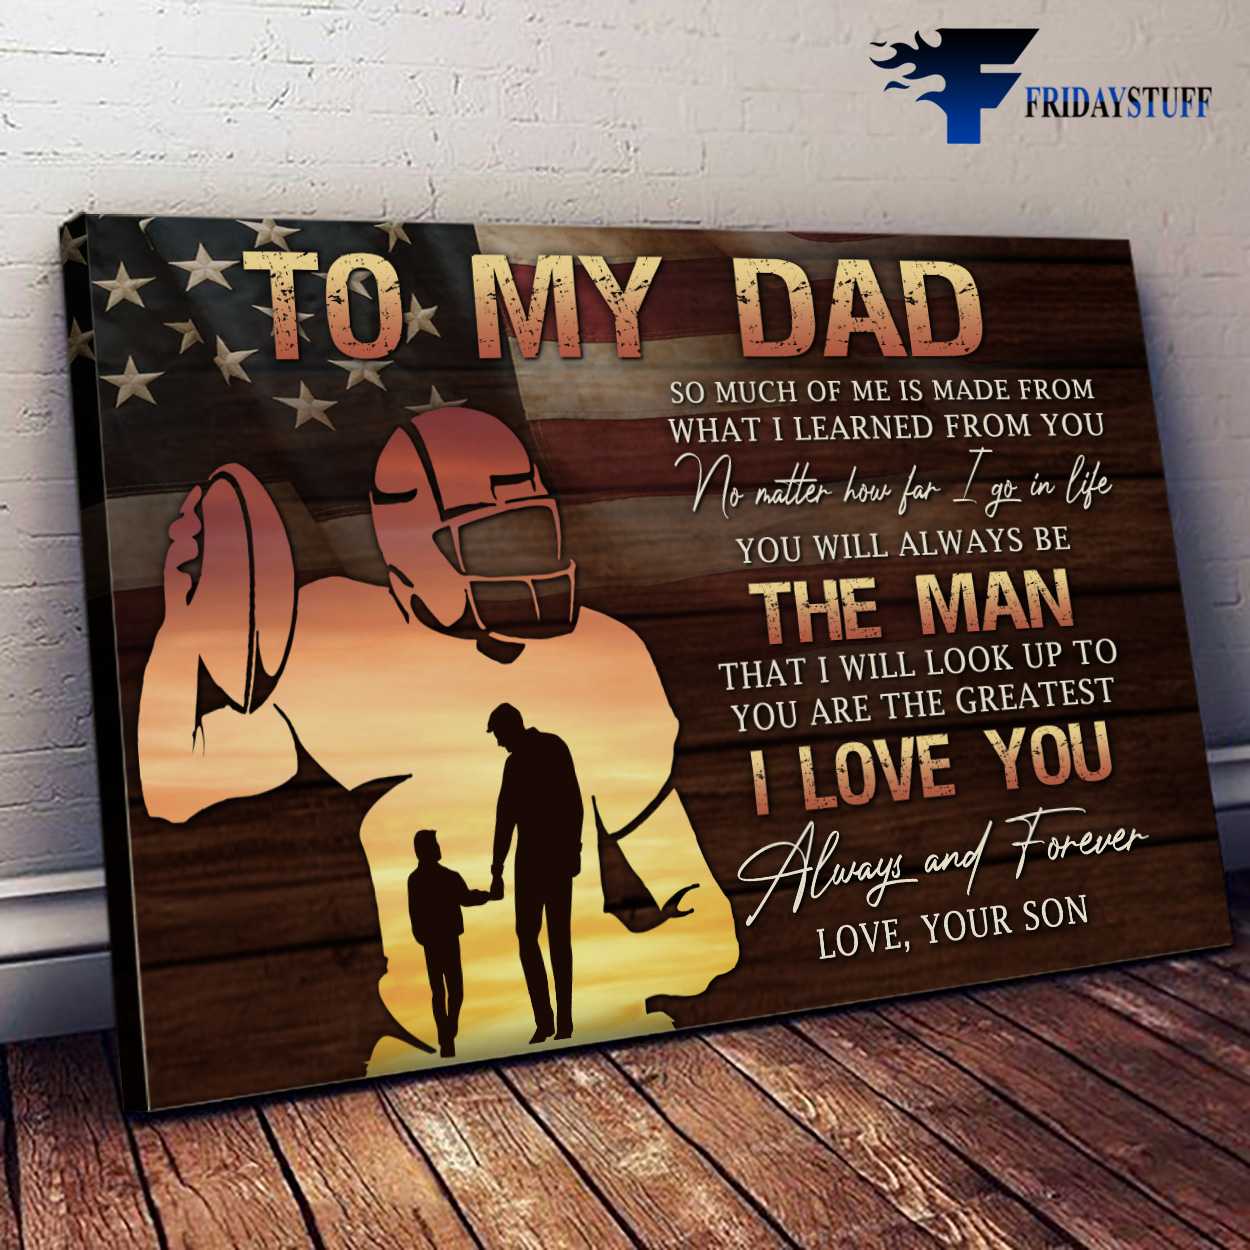 Football Dad, American Football, Dad And Son, To My Dad, So Much Of Me Is Made From, What I Learned From You, No Matter How Far I Go In Life, You Will Always Be The Man, That I Will Look Up To You